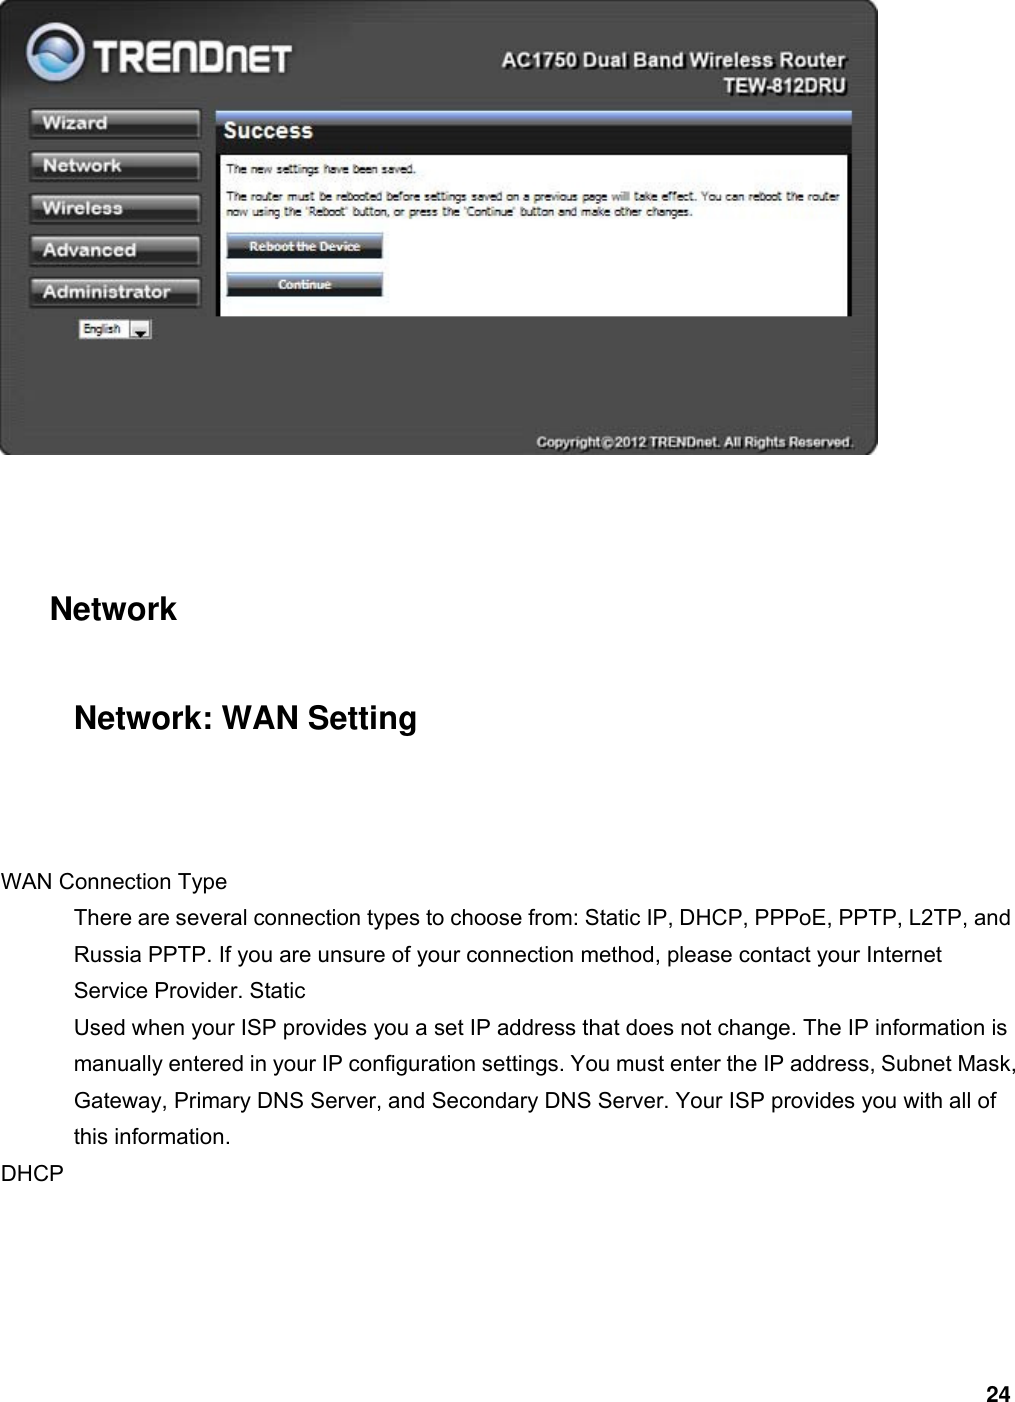 24    Network Network: WAN Setting  WAN Connection Type   There are several connection types to choose from: Static IP, DHCP, PPPoE, PPTP, L2TP, and Russia PPTP. If you are unsure of your connection method, please contact your Internet Service Provider. Static   Used when your ISP provides you a set IP address that does not change. The IP information is manually entered in your IP configuration settings. You must enter the IP address, Subnet Mask, Gateway, Primary DNS Server, and Secondary DNS Server. Your ISP provides you with all of this information.   DHCP  